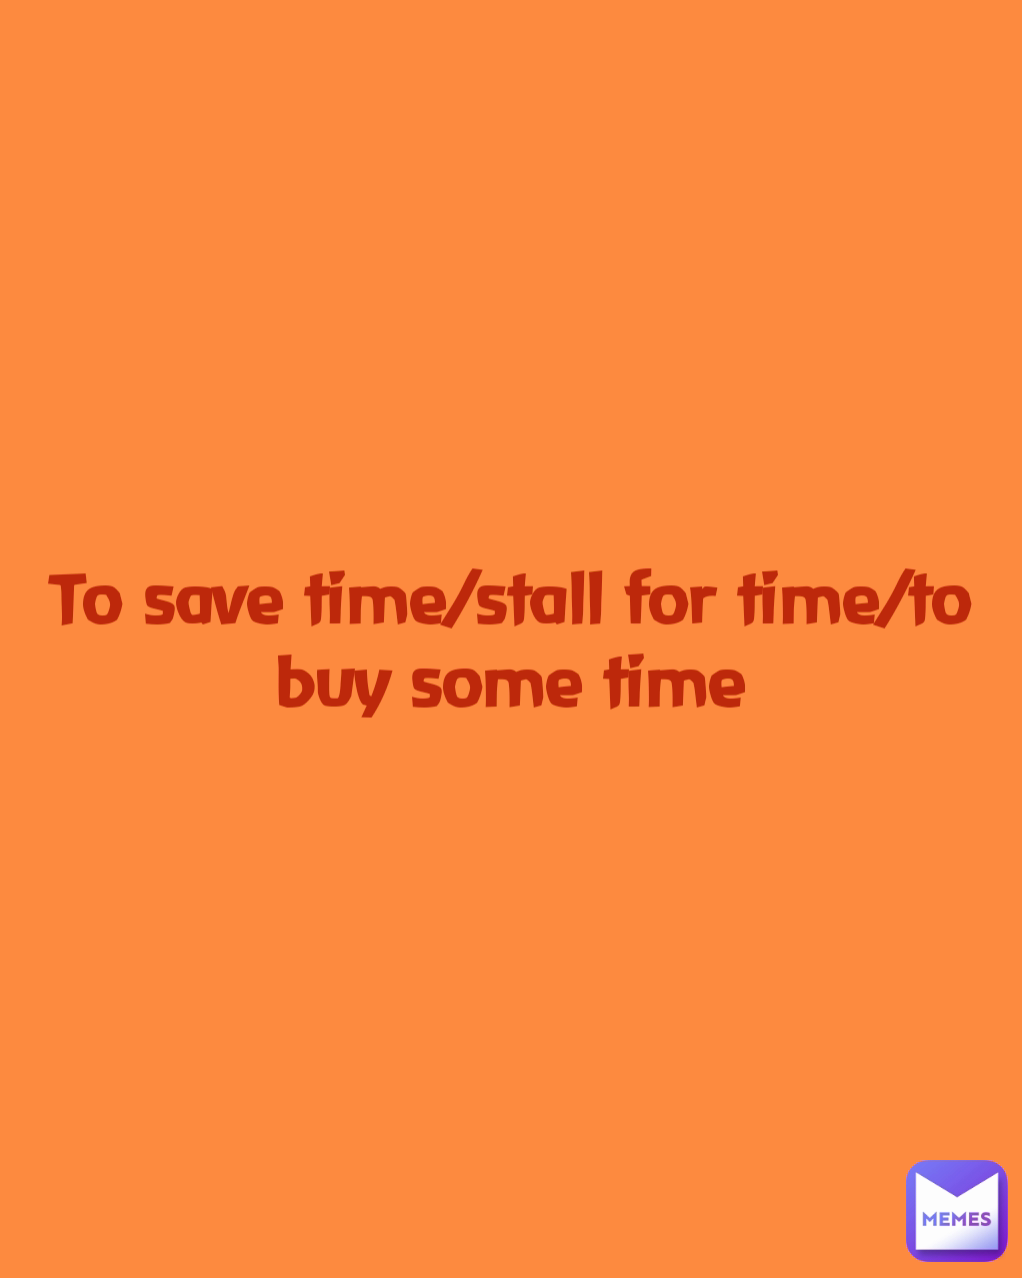 To save time/stall for time/to buy some time